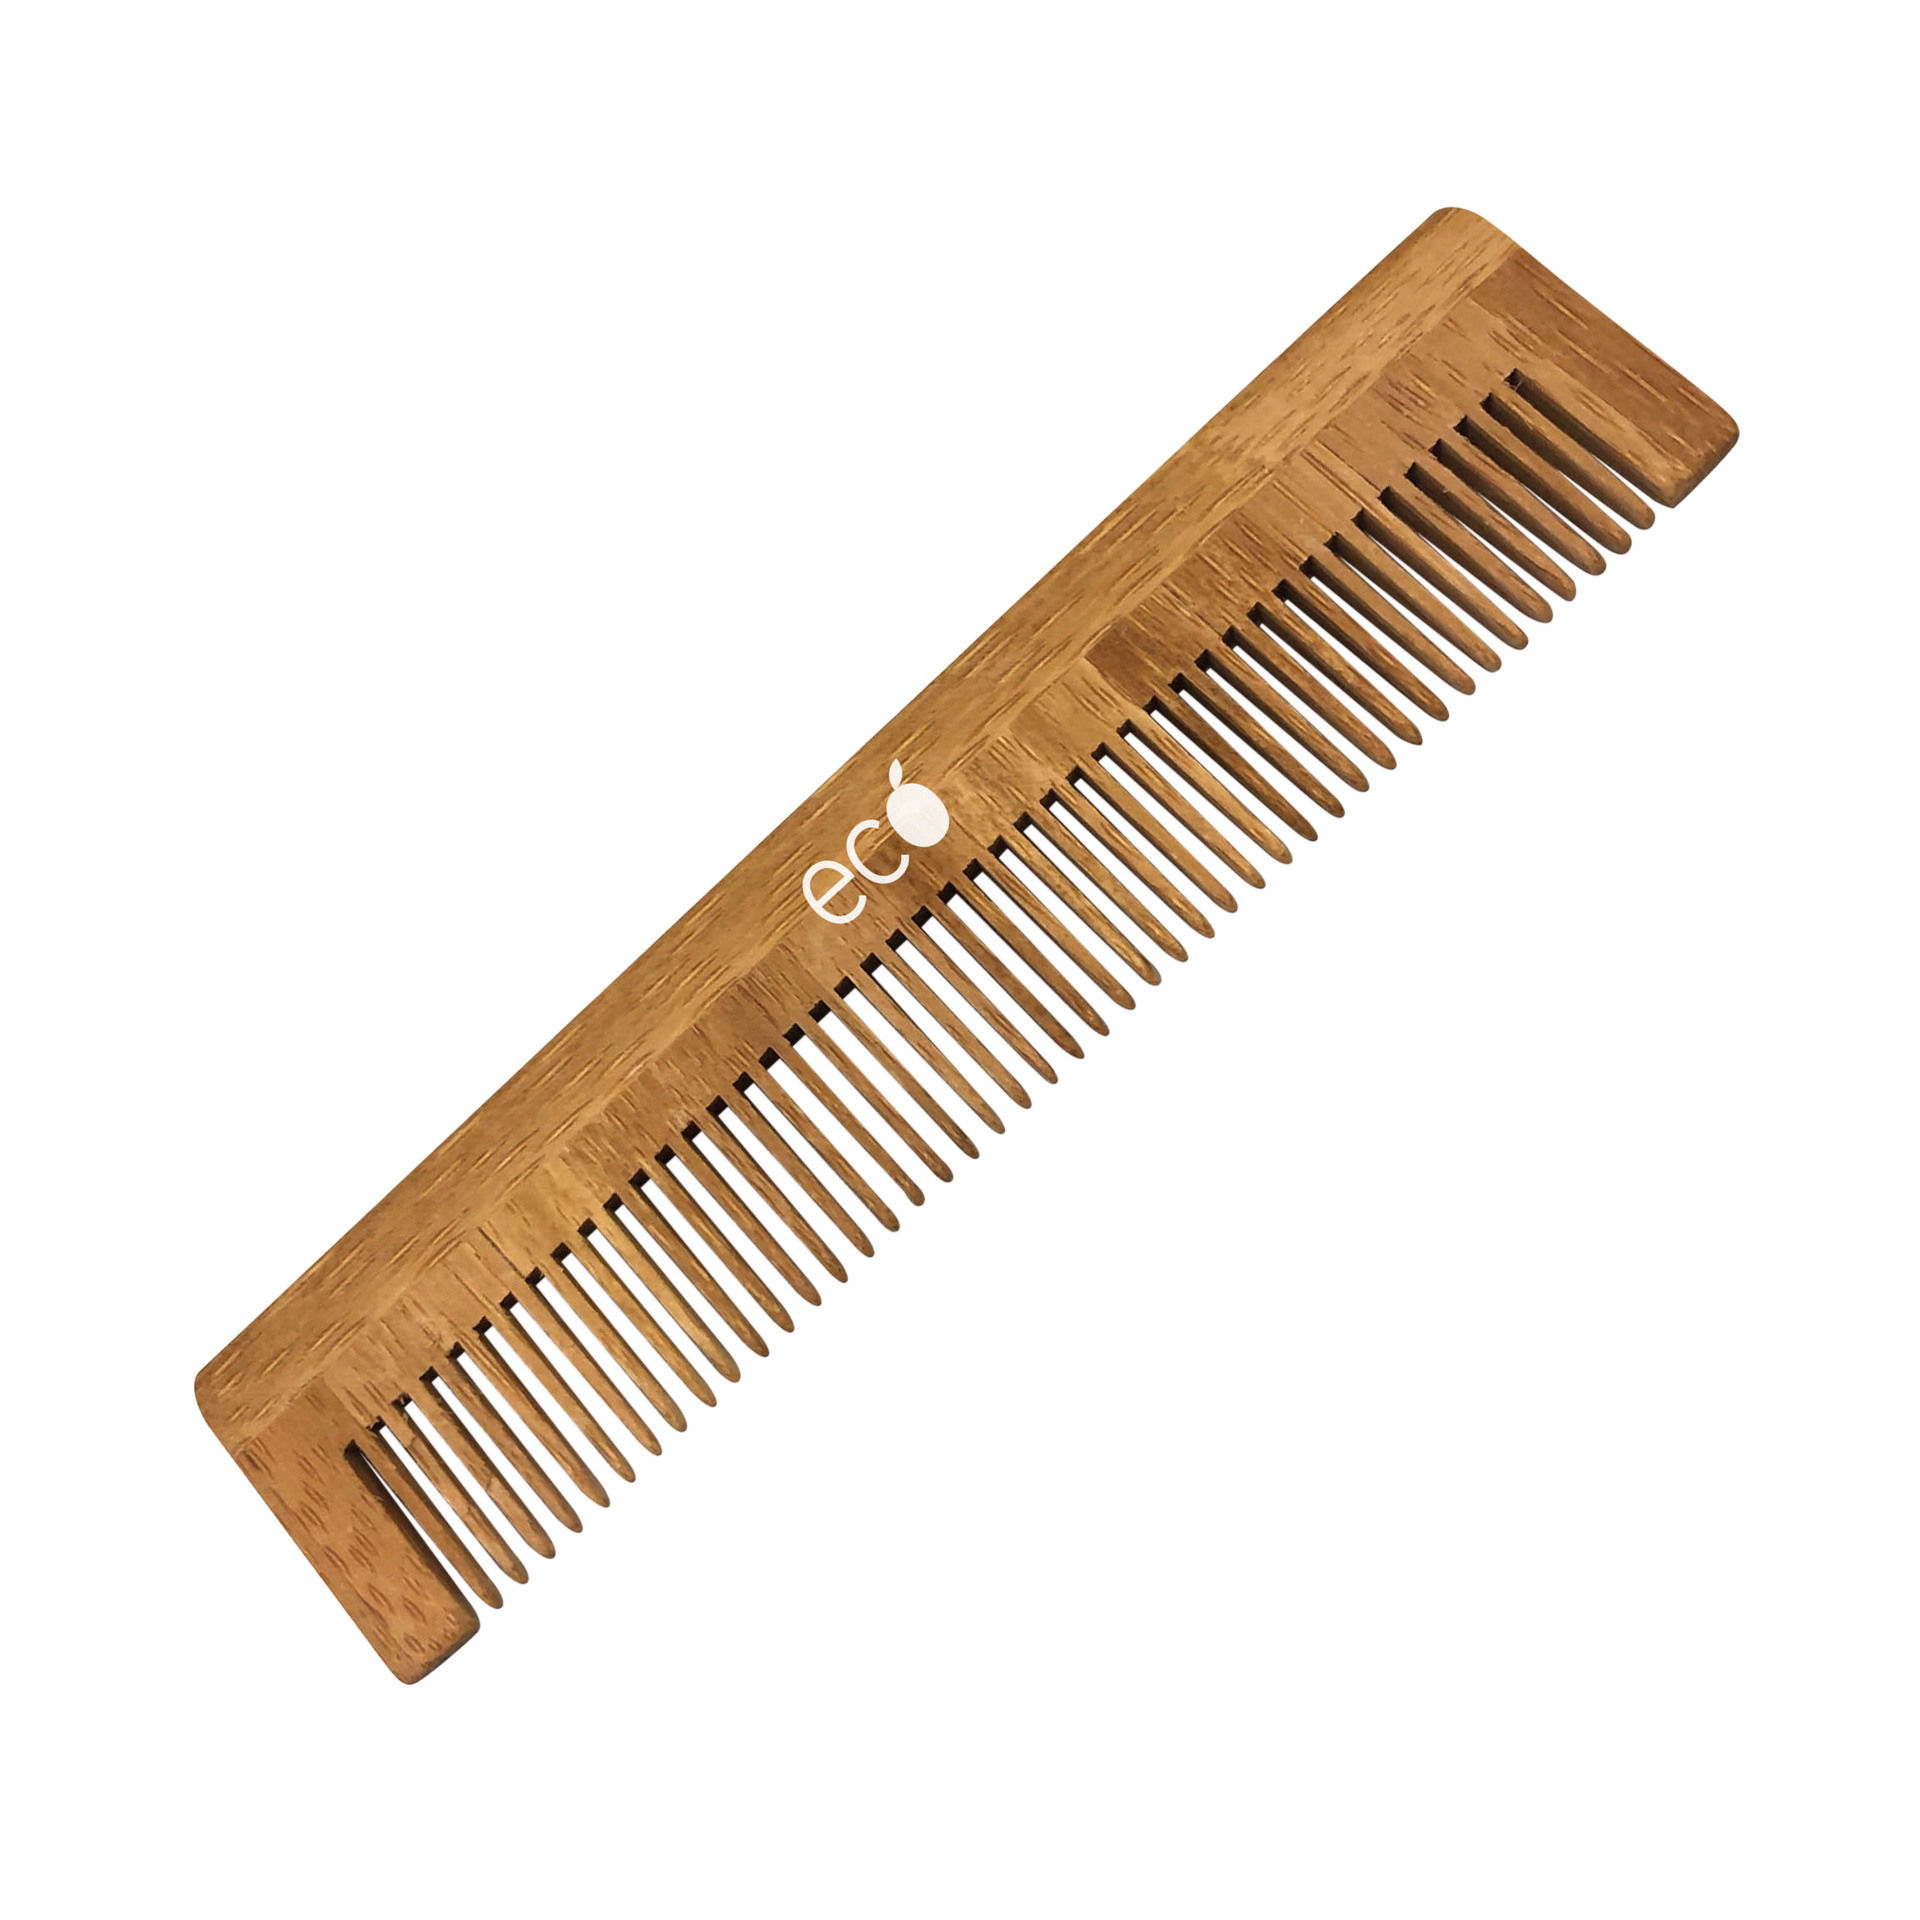 The Green & Good Comb made from sustainable bamboo. Eco-friendly comb that is 100% biodegradable. A great plastic-free option.